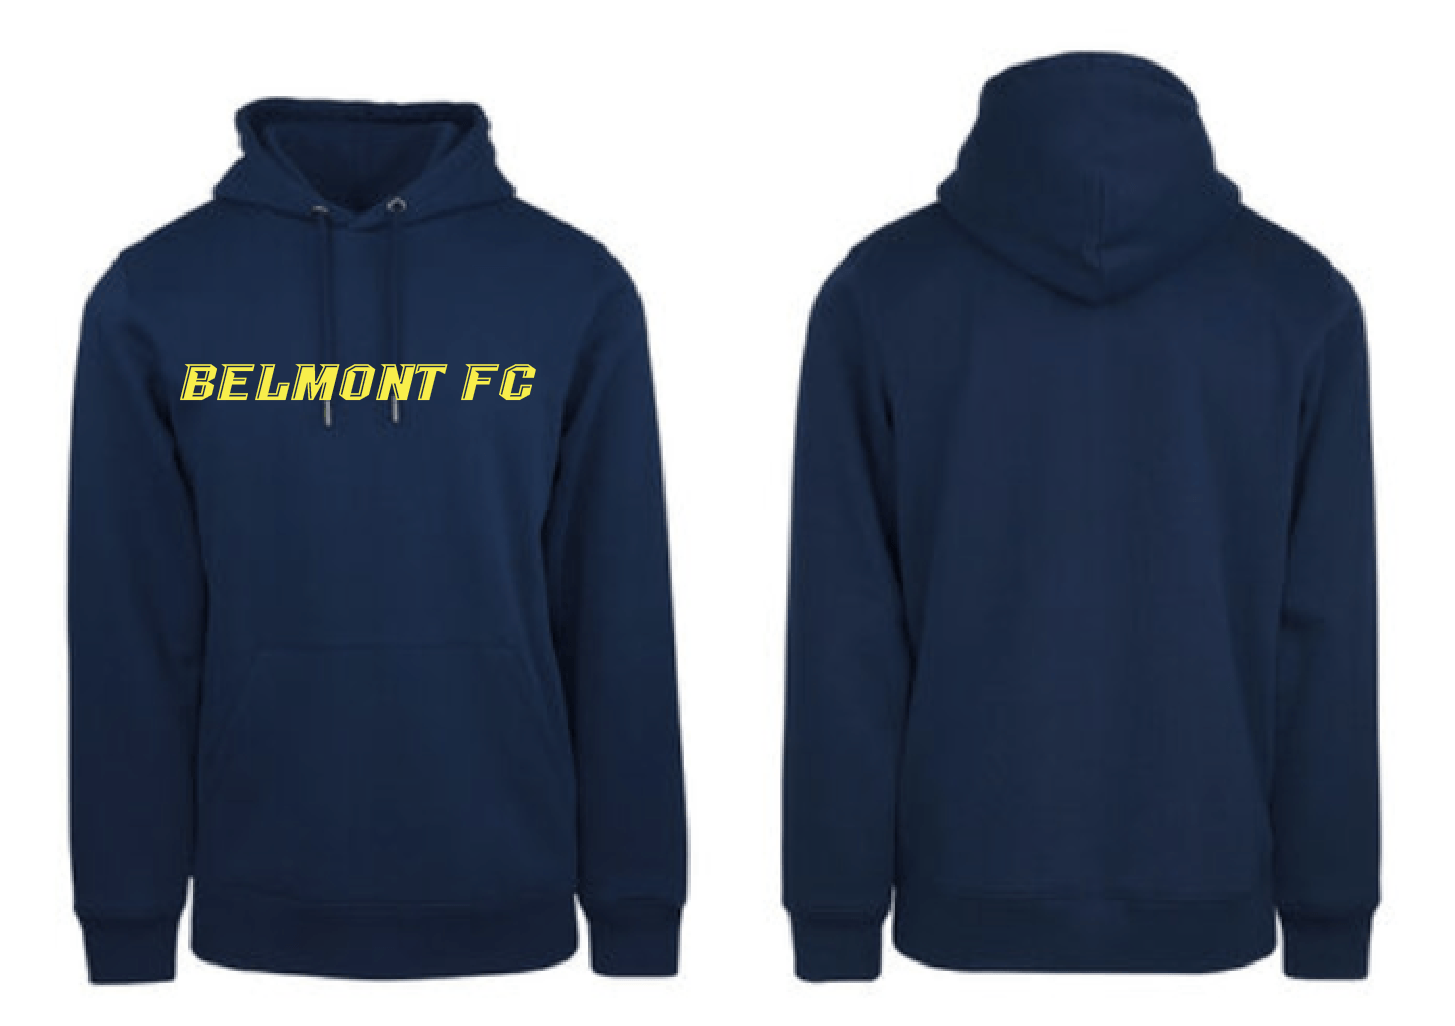 BELMONT FC CLUB UNISEX HOODIE WITH BELMONT FC TEXT